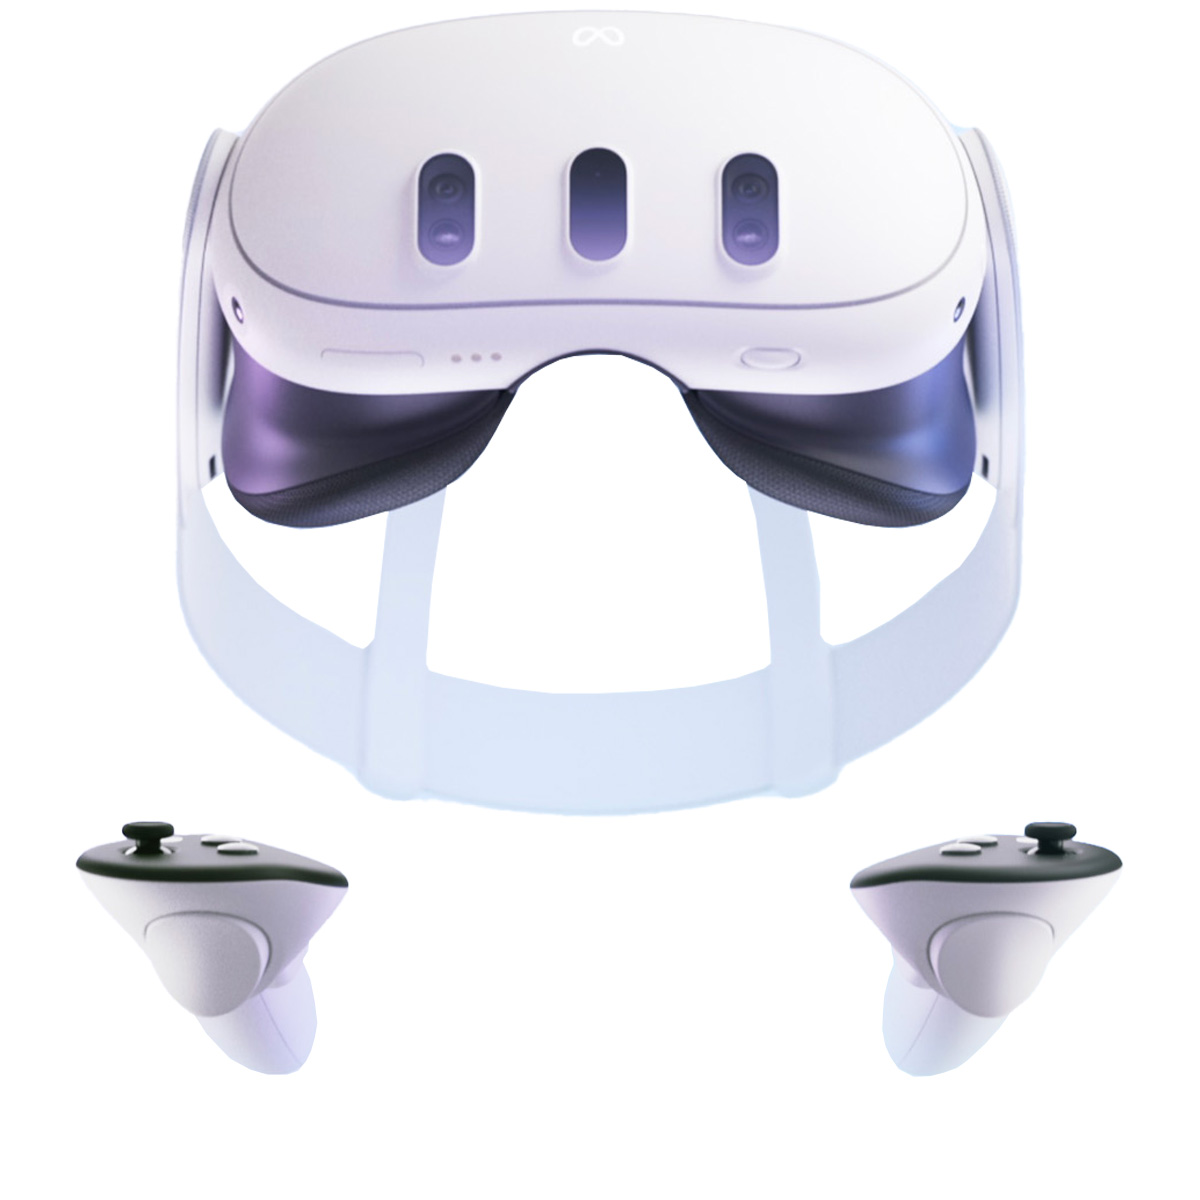 Meta Quest 3 headset and controller render on a white background